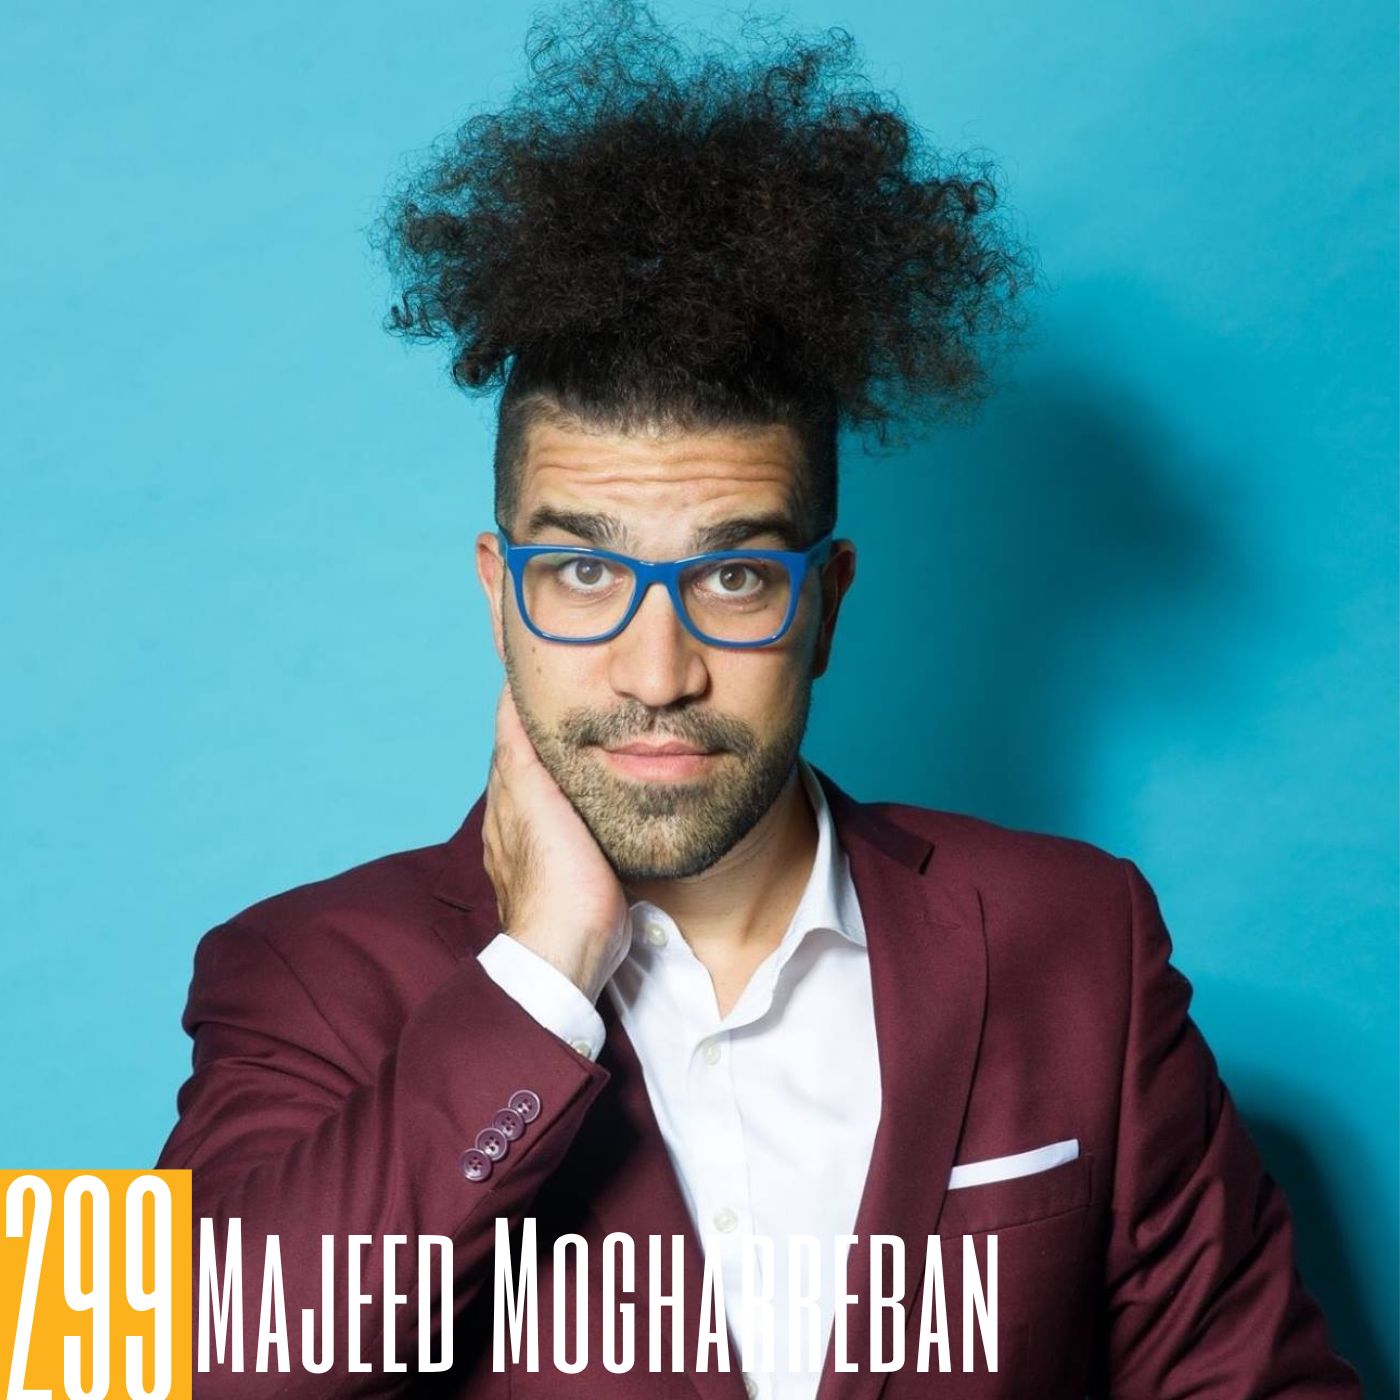 Episode image for 299 Majeed Mogharreban - The Power of Becoming: Providing Humor & Inspiration to the Masses